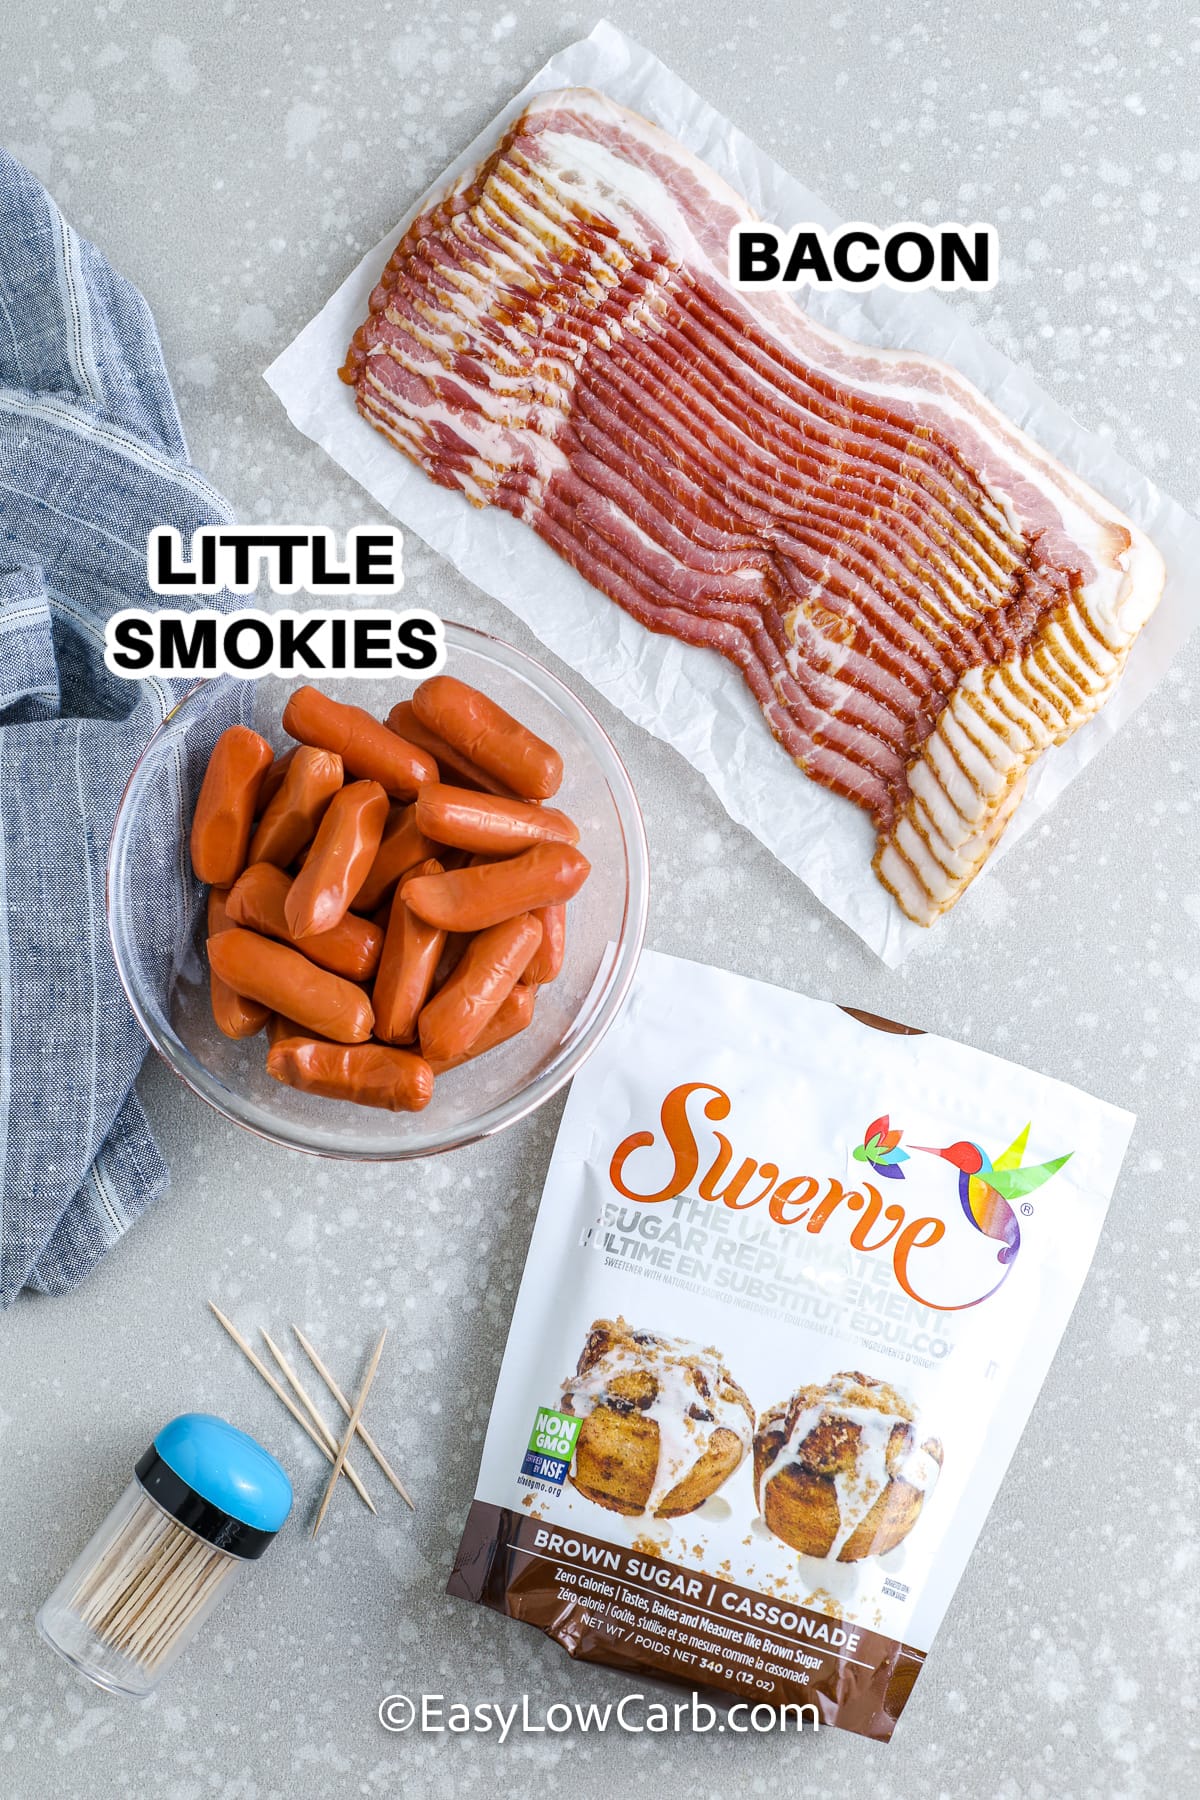 ingredients to make bacon wrapped little smokies including swerve, bacon, and little smokies